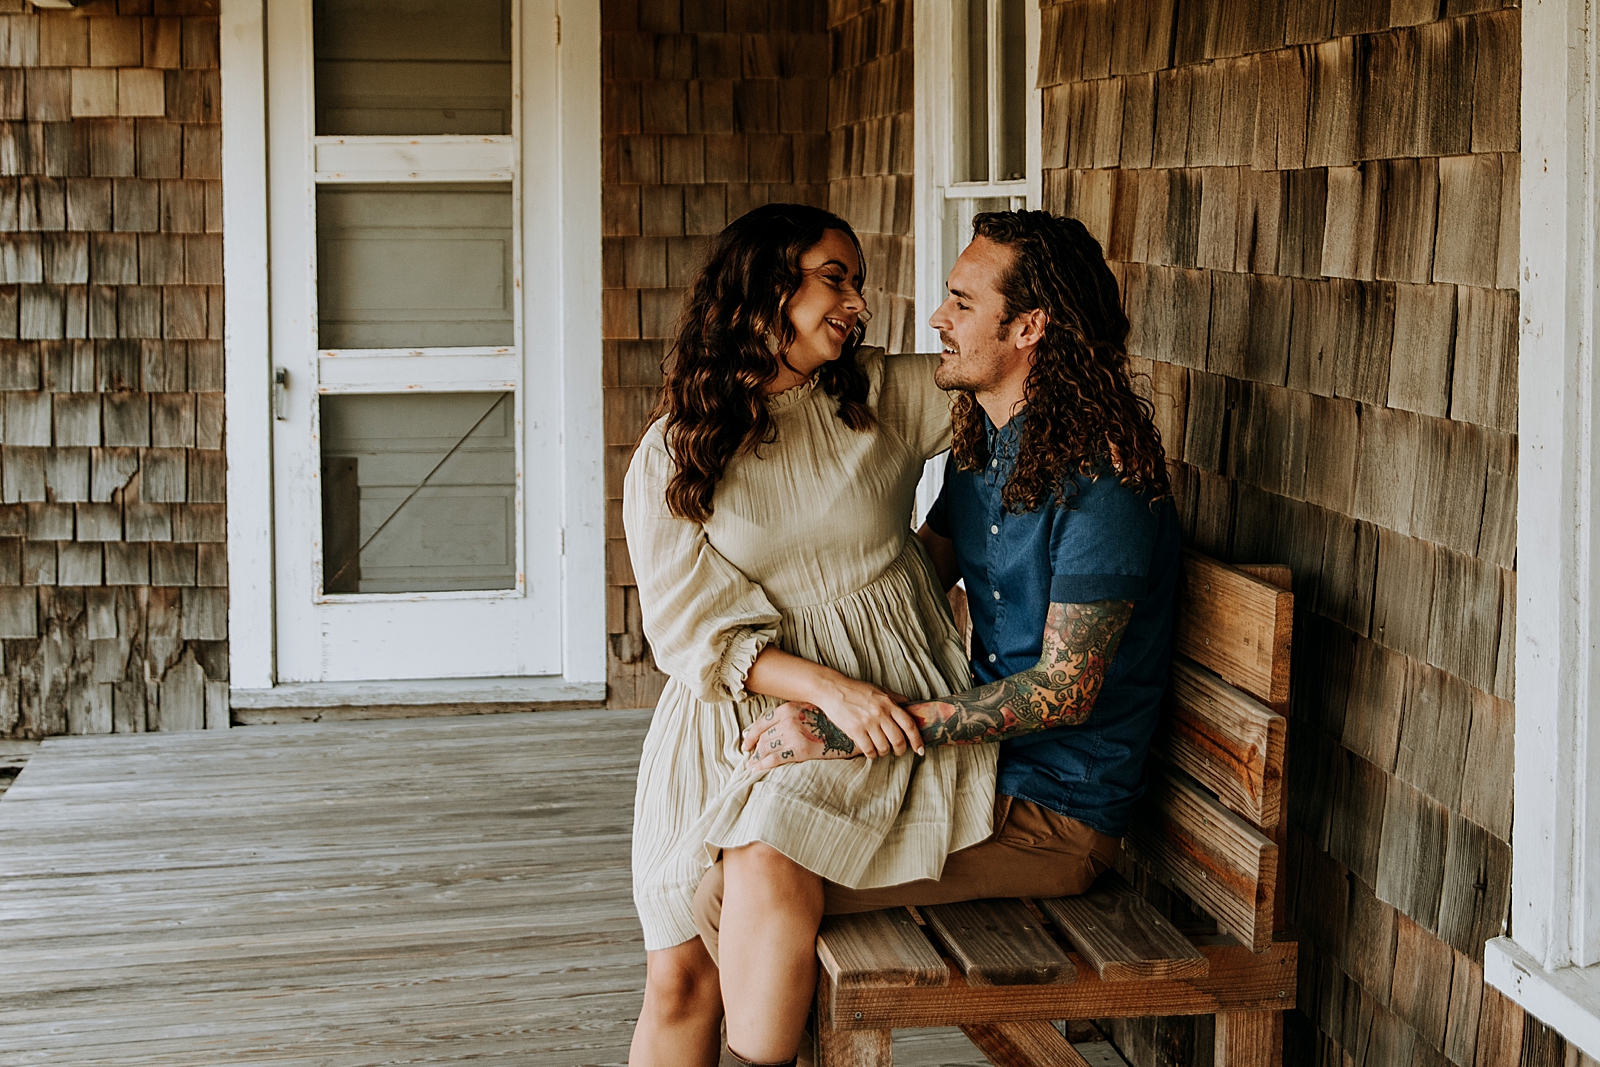 Lady sitting on man's lap with both of them looking at each other Dubois Park Engagement Photography captured by South Florida Family Photographer Maggie Alvarez Photography